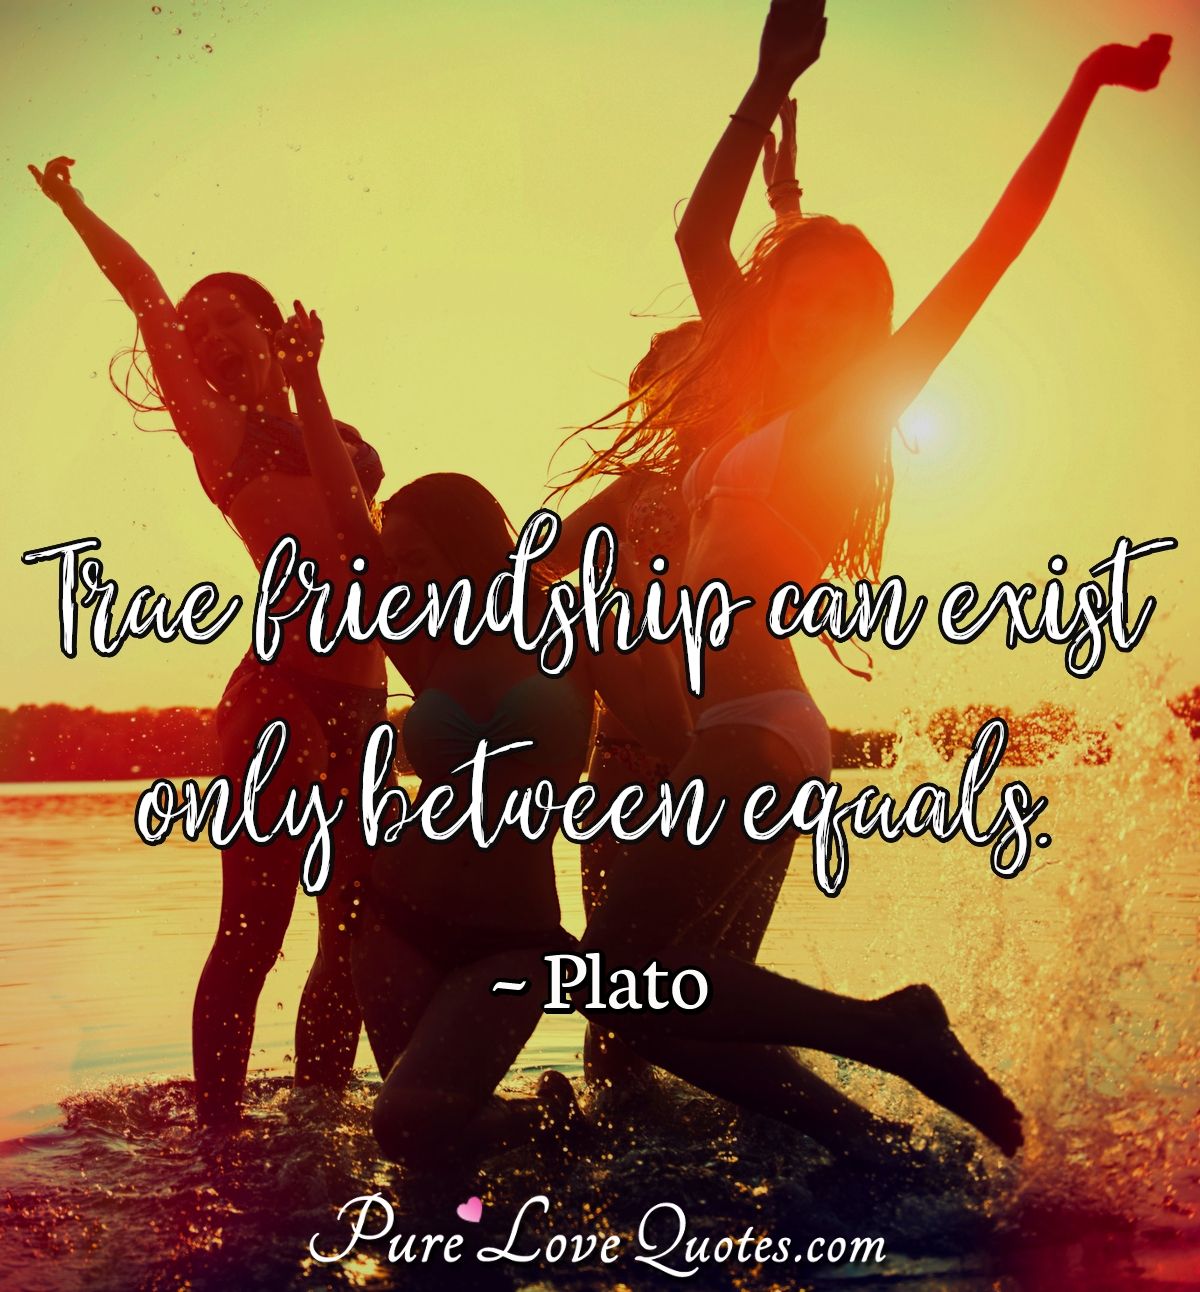 True friendship can exist only between equals. - Plato